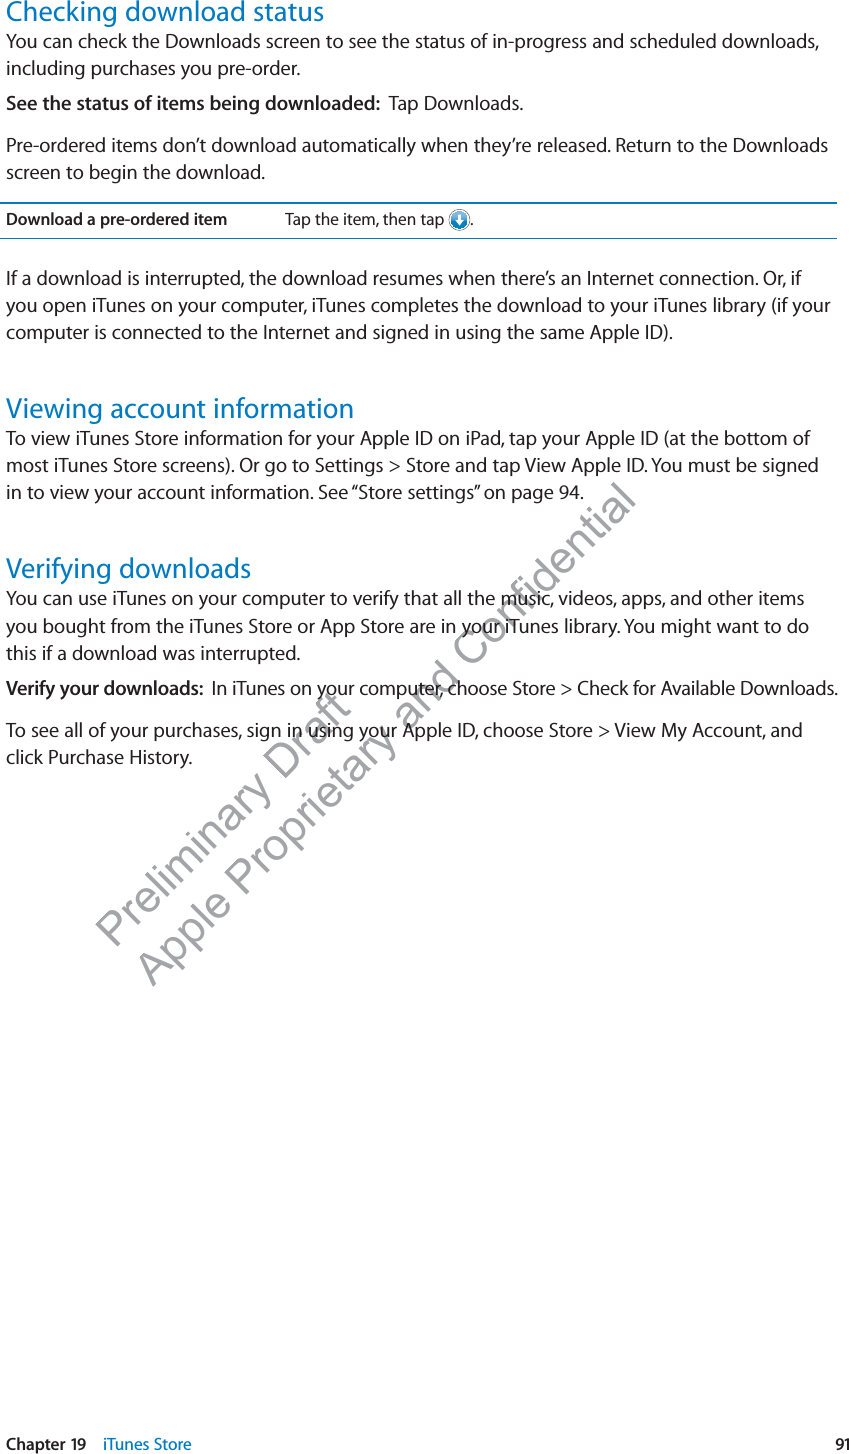 Preliminary Draft Apple Proprietary and Confidential Checking download statusYou can check the Downloads screen to see the status of in-progress and scheduled downloads, including purchases you pre-order.See the status of items being downloaded:  Tap Downloads.Pre-ordered items don’t download automatically when they’re released. Return to the Downloads screen to begin the download.Download a pre-ordered item Tap the item, then tap  .If a download is interrupted, the download resumes when there’s an Internet connection. Or, if you open iTunes on your computer, iTunes completes the download to your iTunes library (if your computer is connected to the Internet and signed in using the same Apple ID).Viewing account informationTo view iTunes Store information for your Apple ID on iPad, tap your Apple ID (at the bottom of most iTunes Store screens). Or go to Settings &gt; Store and tap View Apple ID. You must be signed in to view your account information. See “Store settings” on page 94.Verifying downloadsYou can use iTunes on your computer to verify that all the music, videos, apps, and other items you bought from the iTunes Store or App Store are in your iTunes library. You might want to do this if a download was interrupted.Verify your downloads:  In iTunes on your computer, choose Store &gt; Check for Available Downloads.To see all of your purchases, sign in using your Apple ID, choose Store &gt; View My Account, and click Purchase History.91Chapter 19    iTunes Store